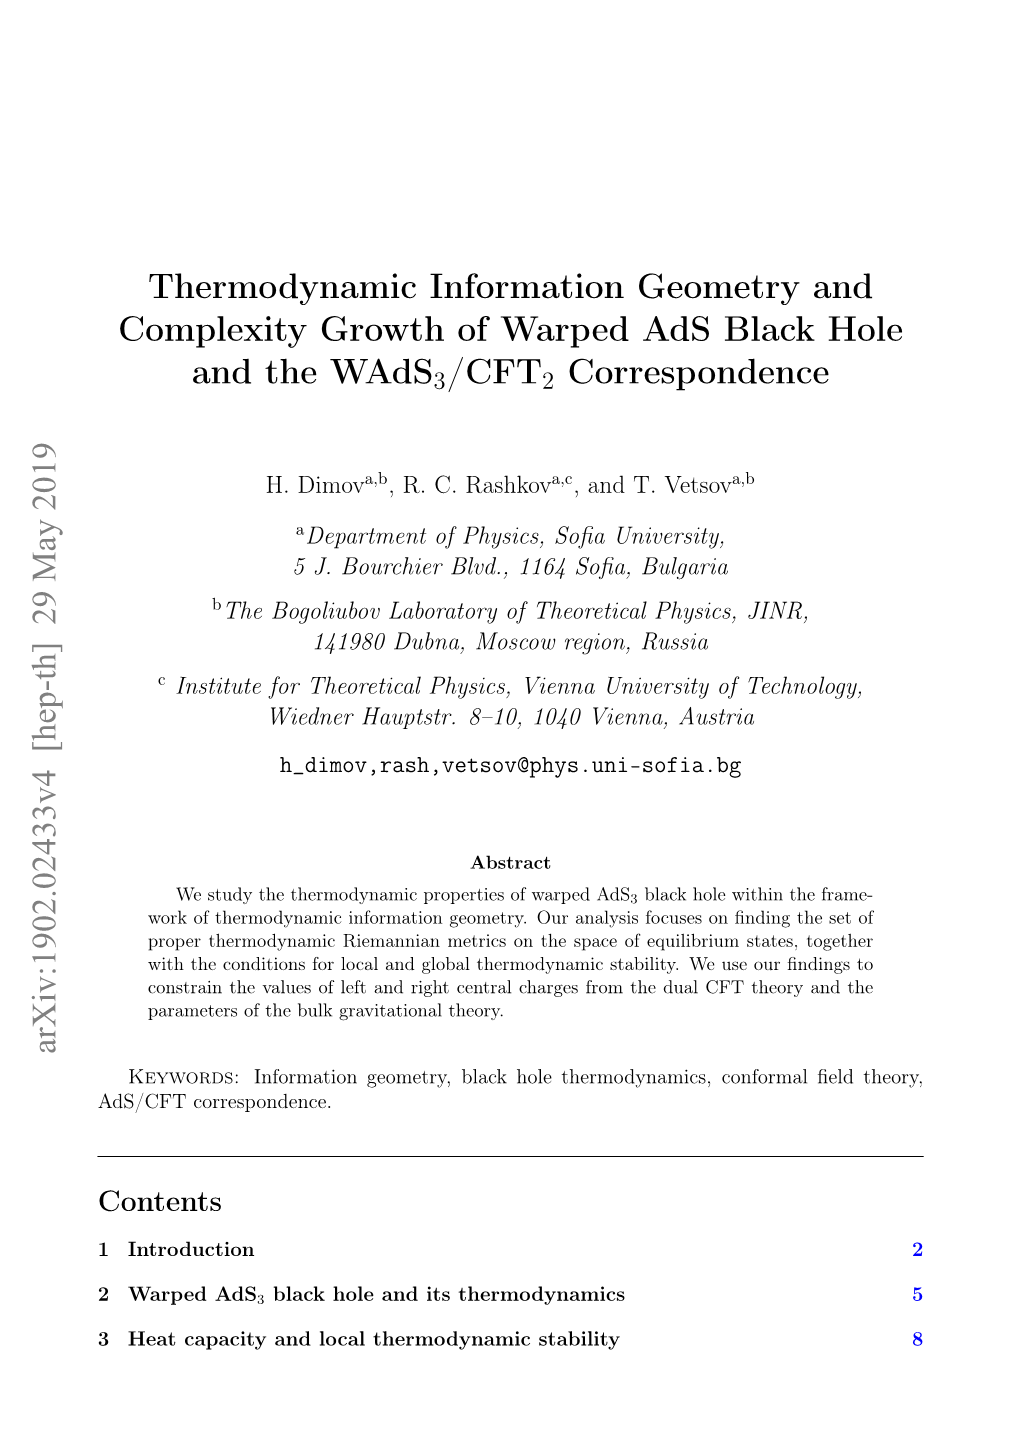 Thermodynamic Information Geometry and Complexity Growth of Warped Ads Black Hole and the Wads3/CFT2 Correspondence